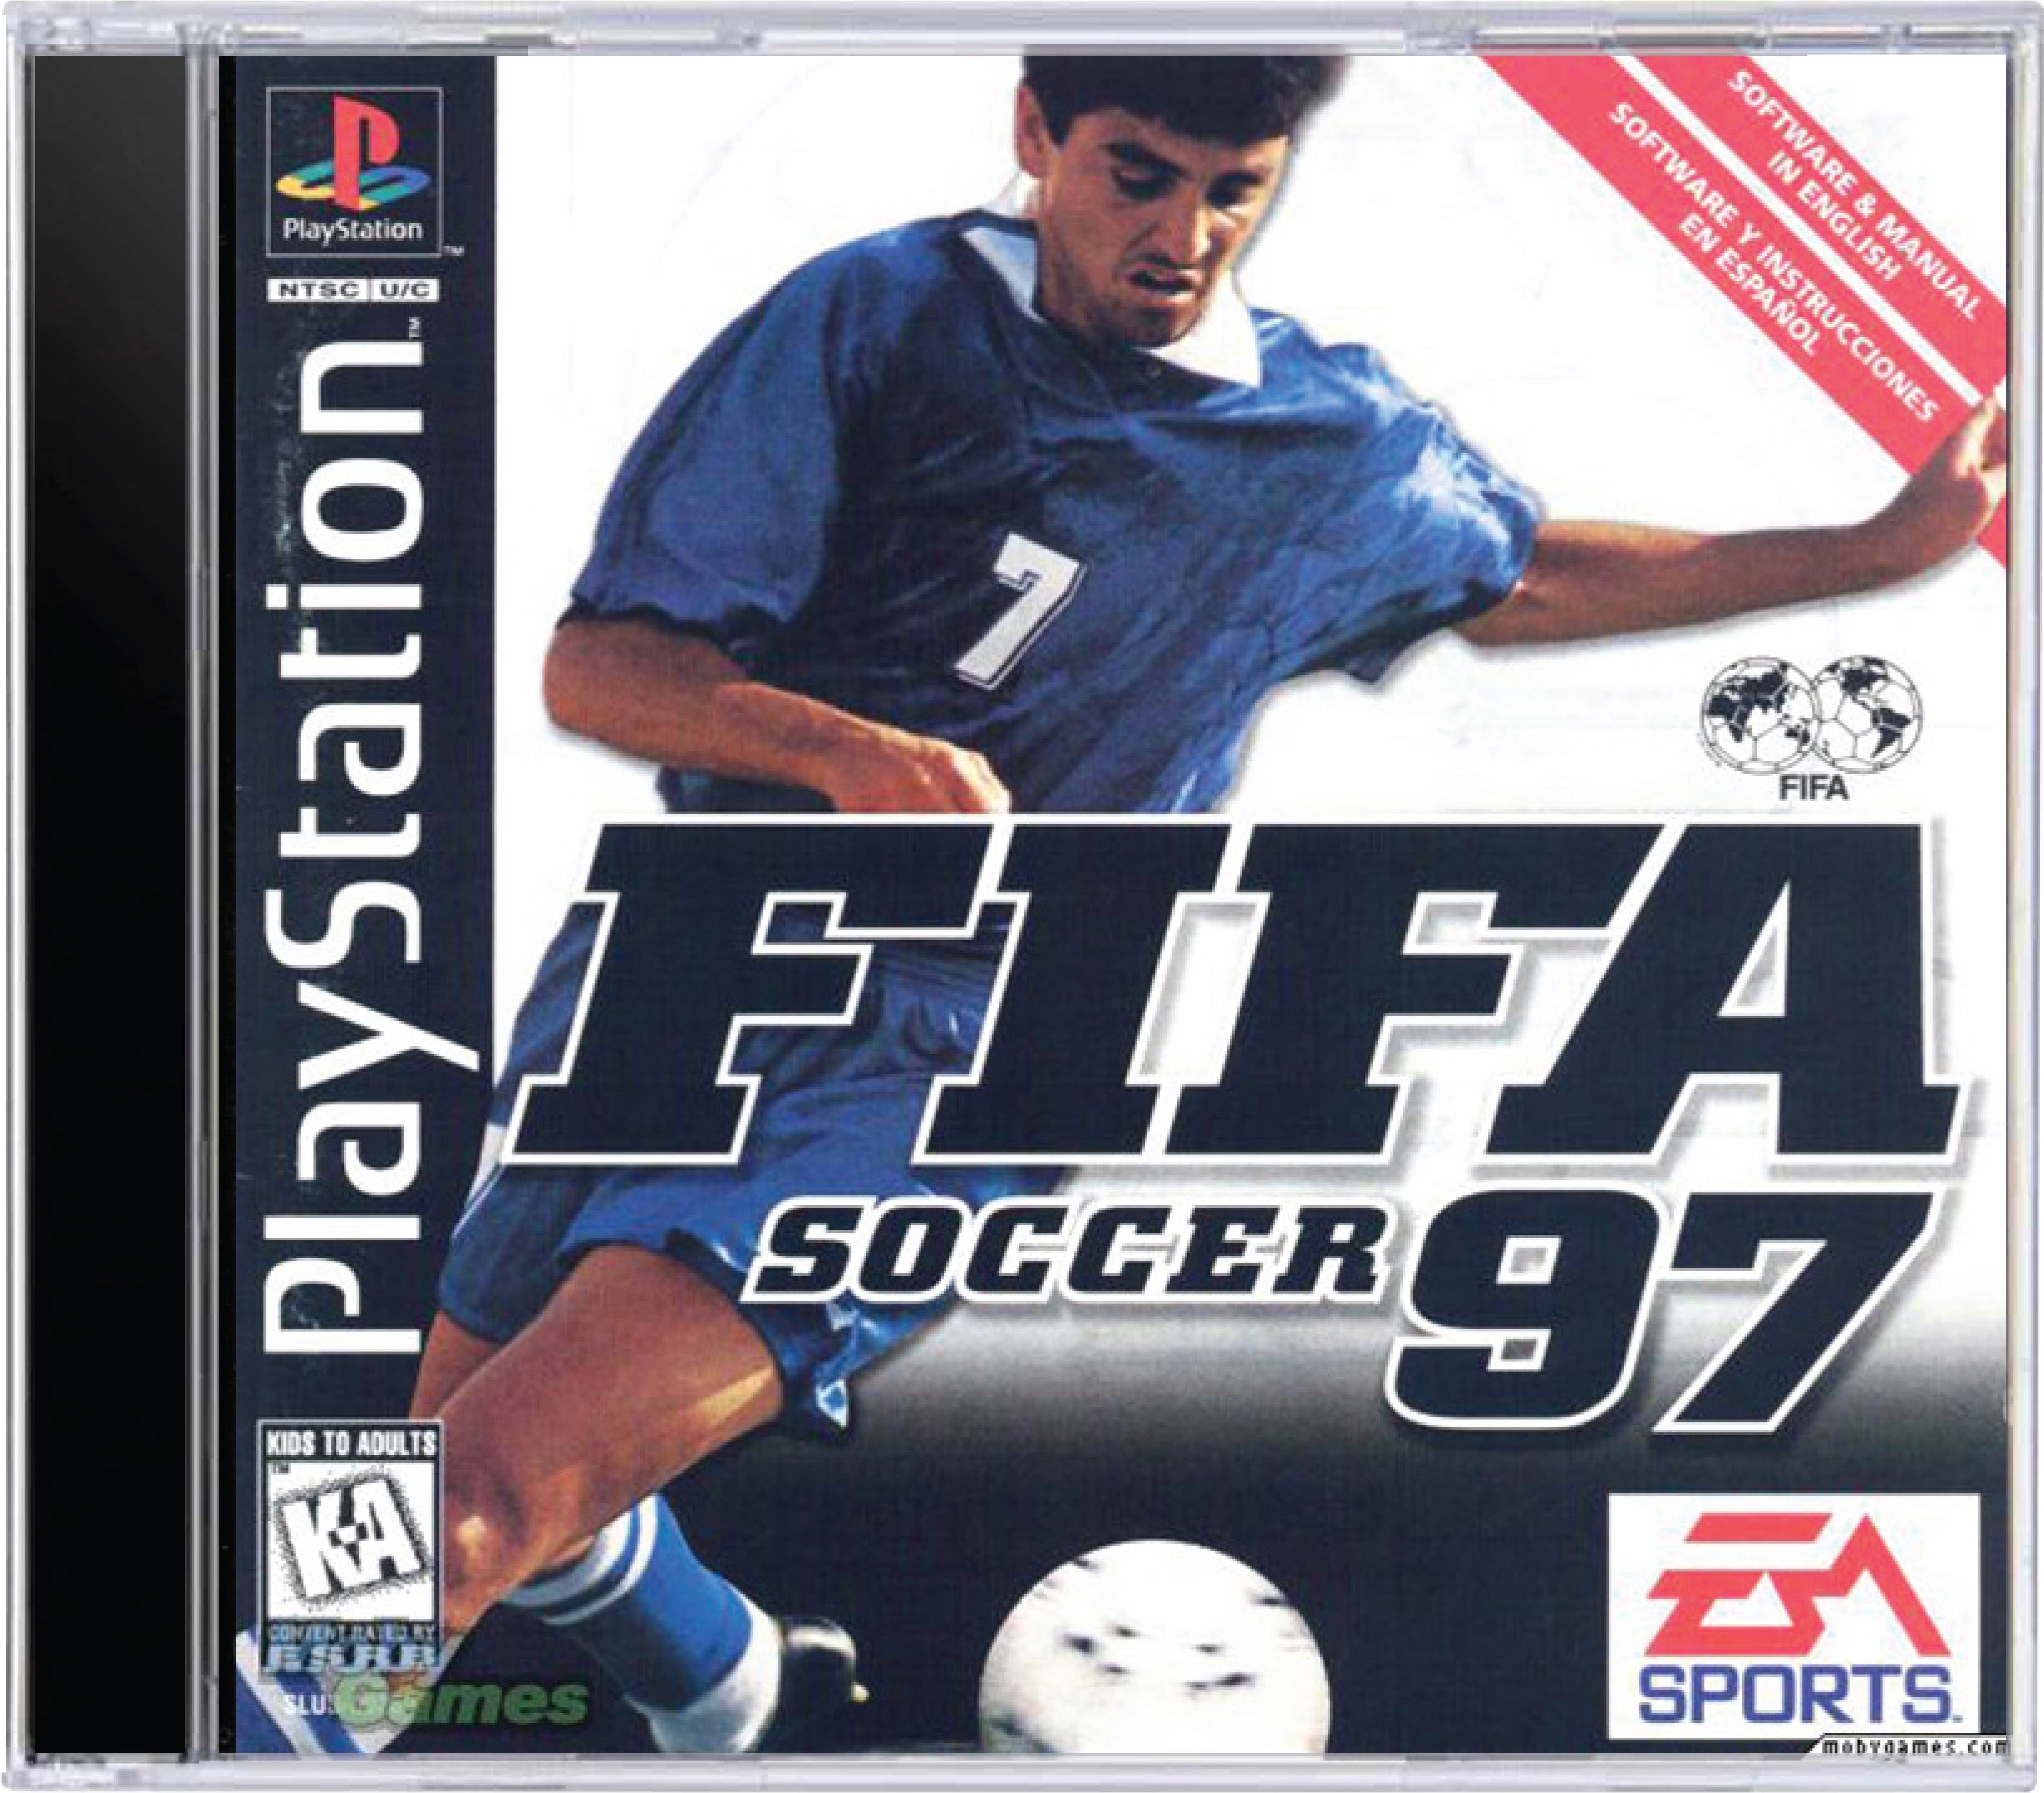 FIFA Soccer 97 Cover Art and Product Photo